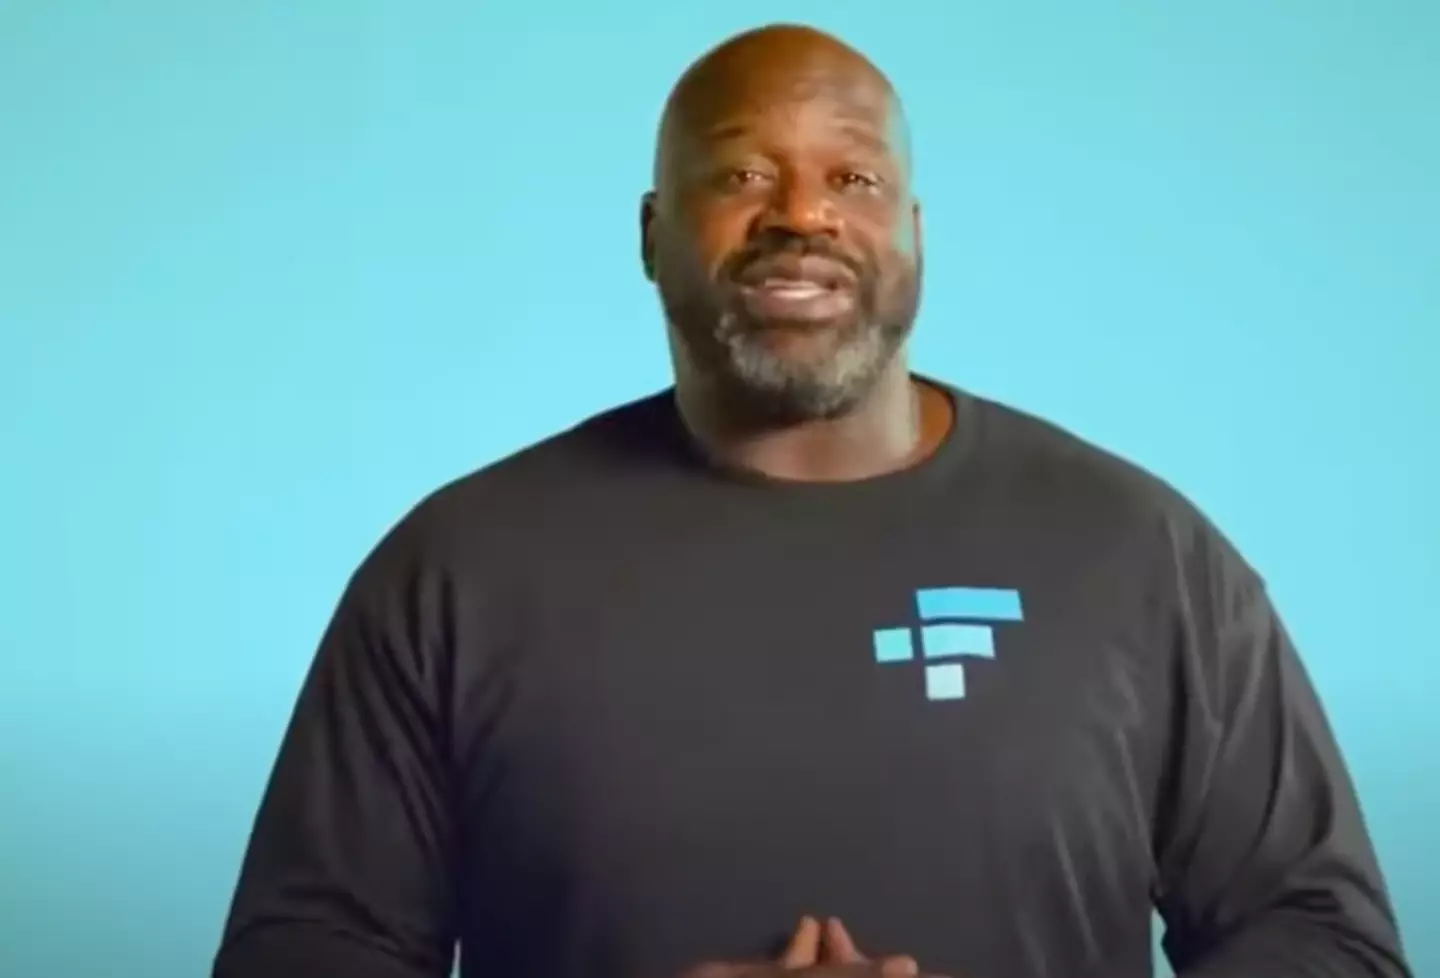 The basketball legend says he was just paid to star in a commercial.